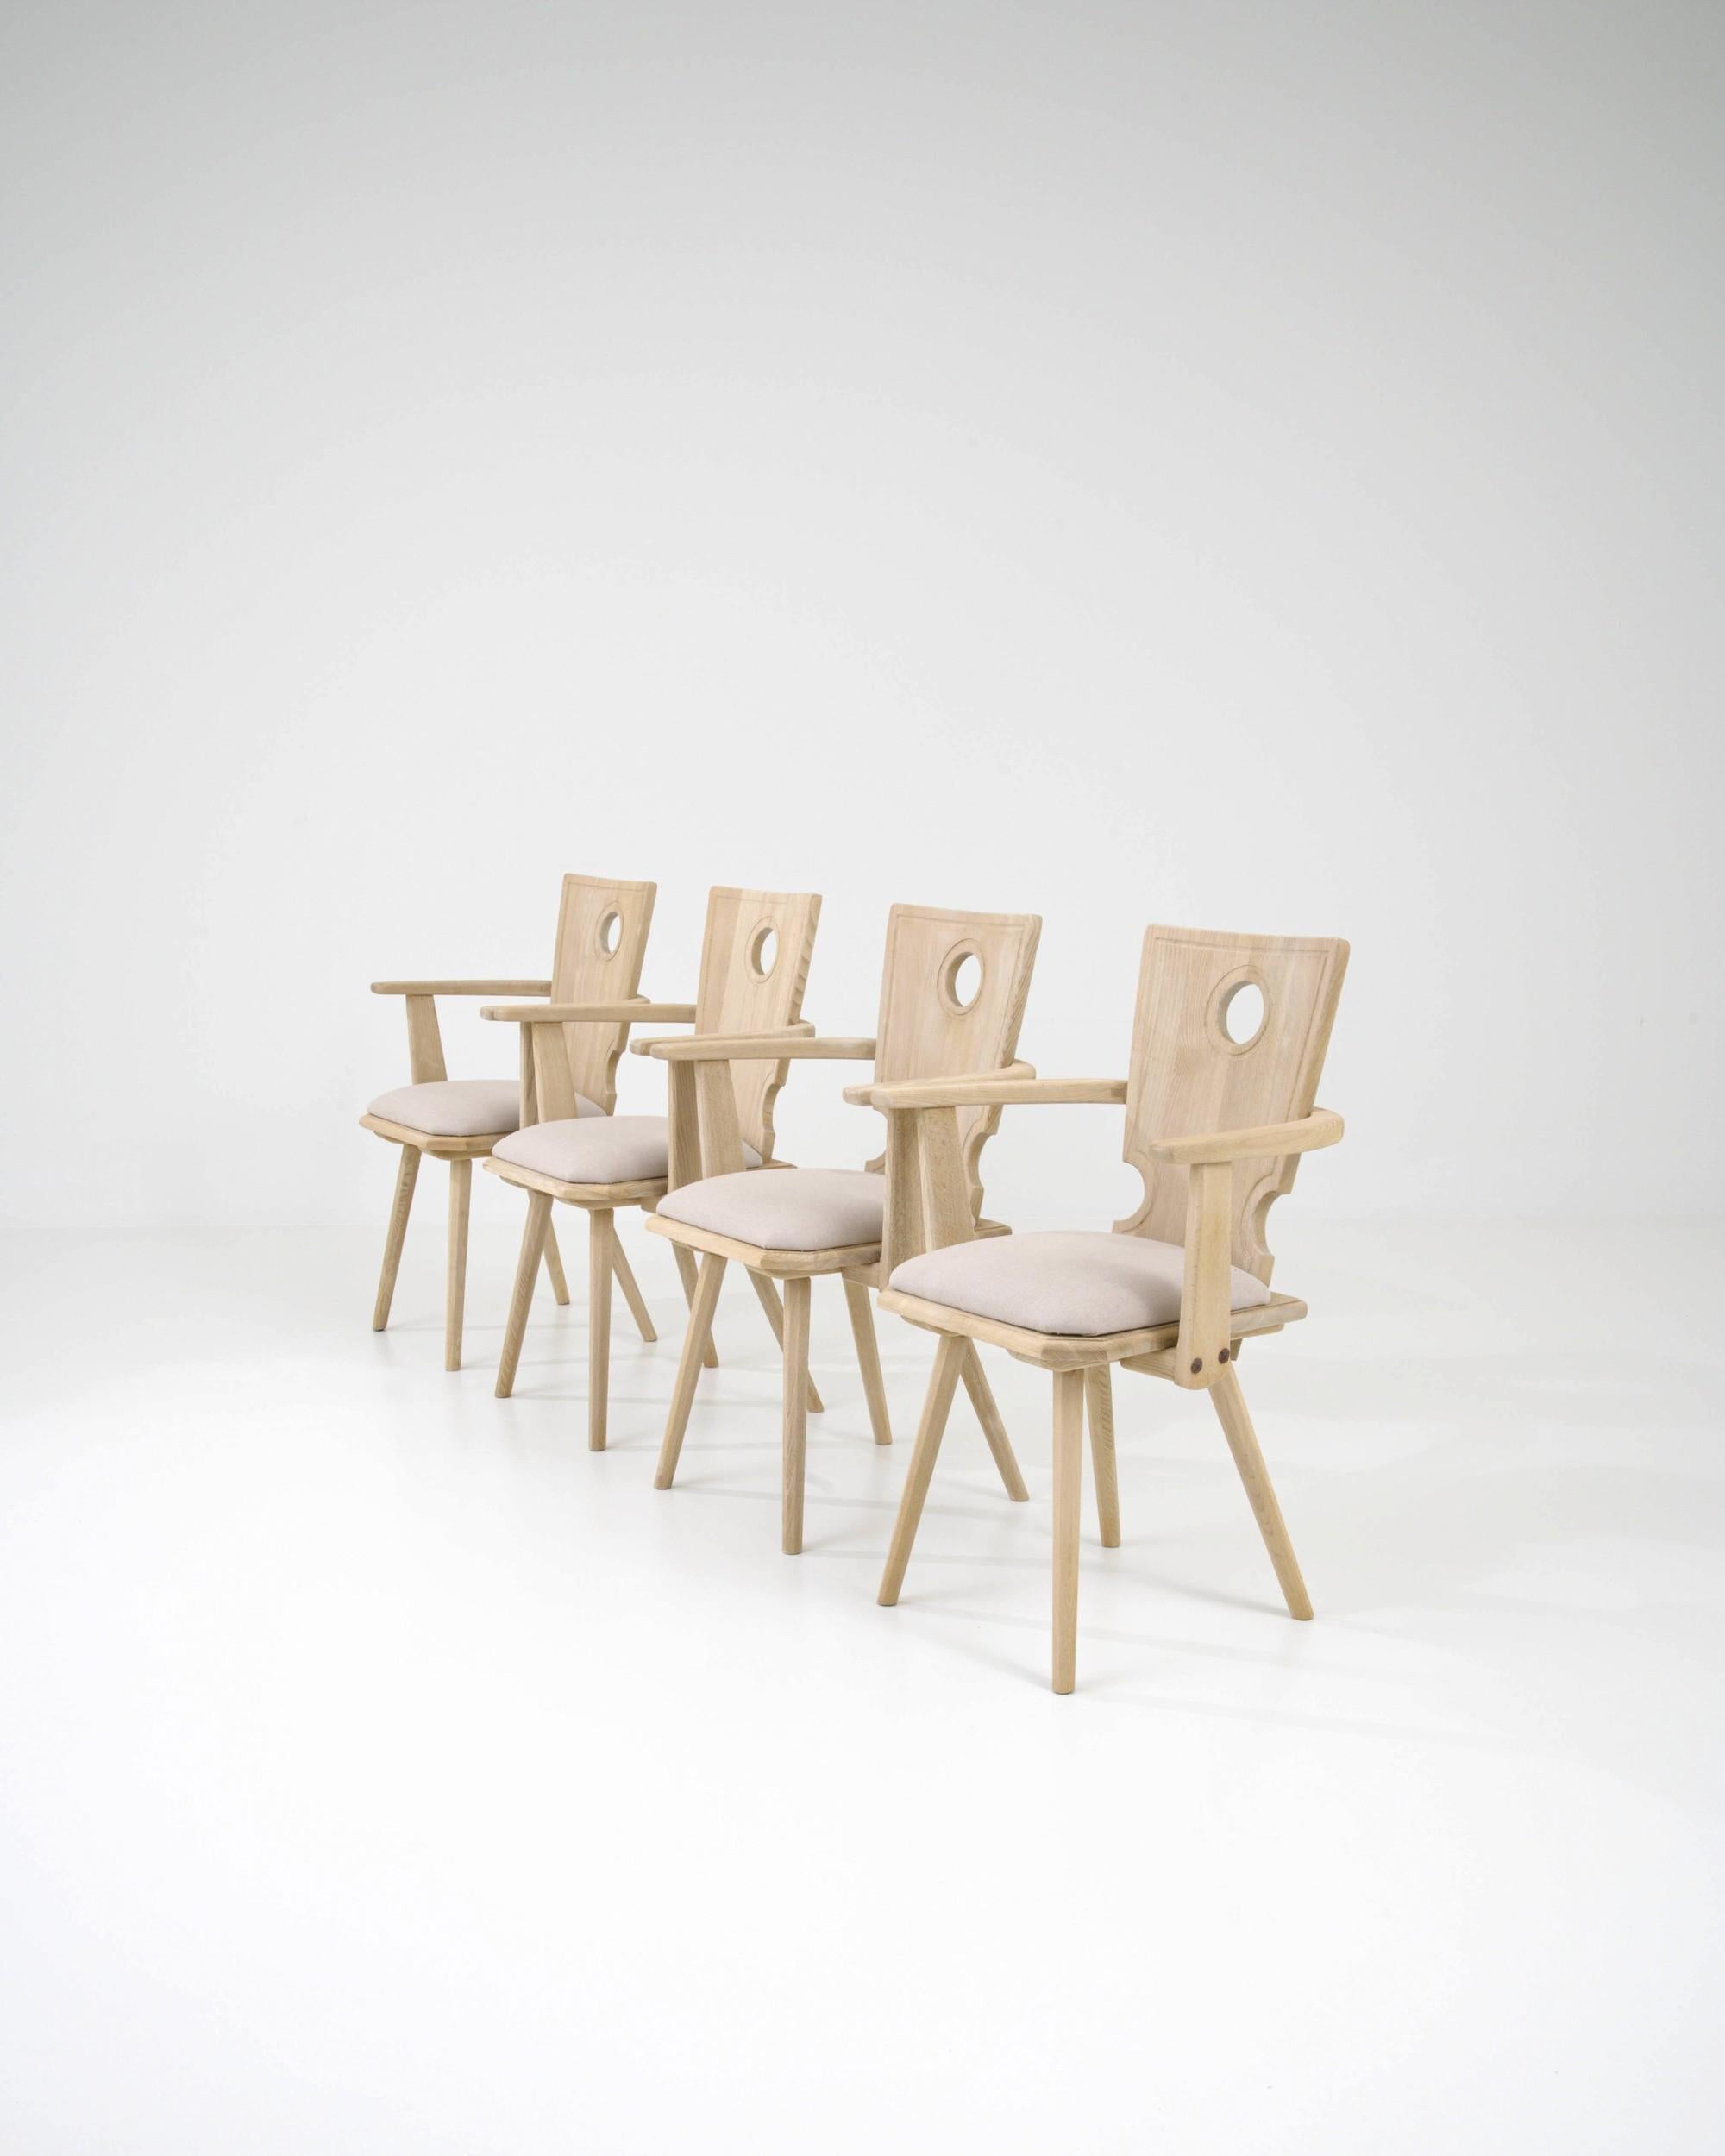 A pale hue and refined country silhouette give this vintage set of four wooden dining chairs a homey, serene character. Made in Central Europe in the 20th century, the form is inspired by traditional farmhouse chairs — with a touch of the